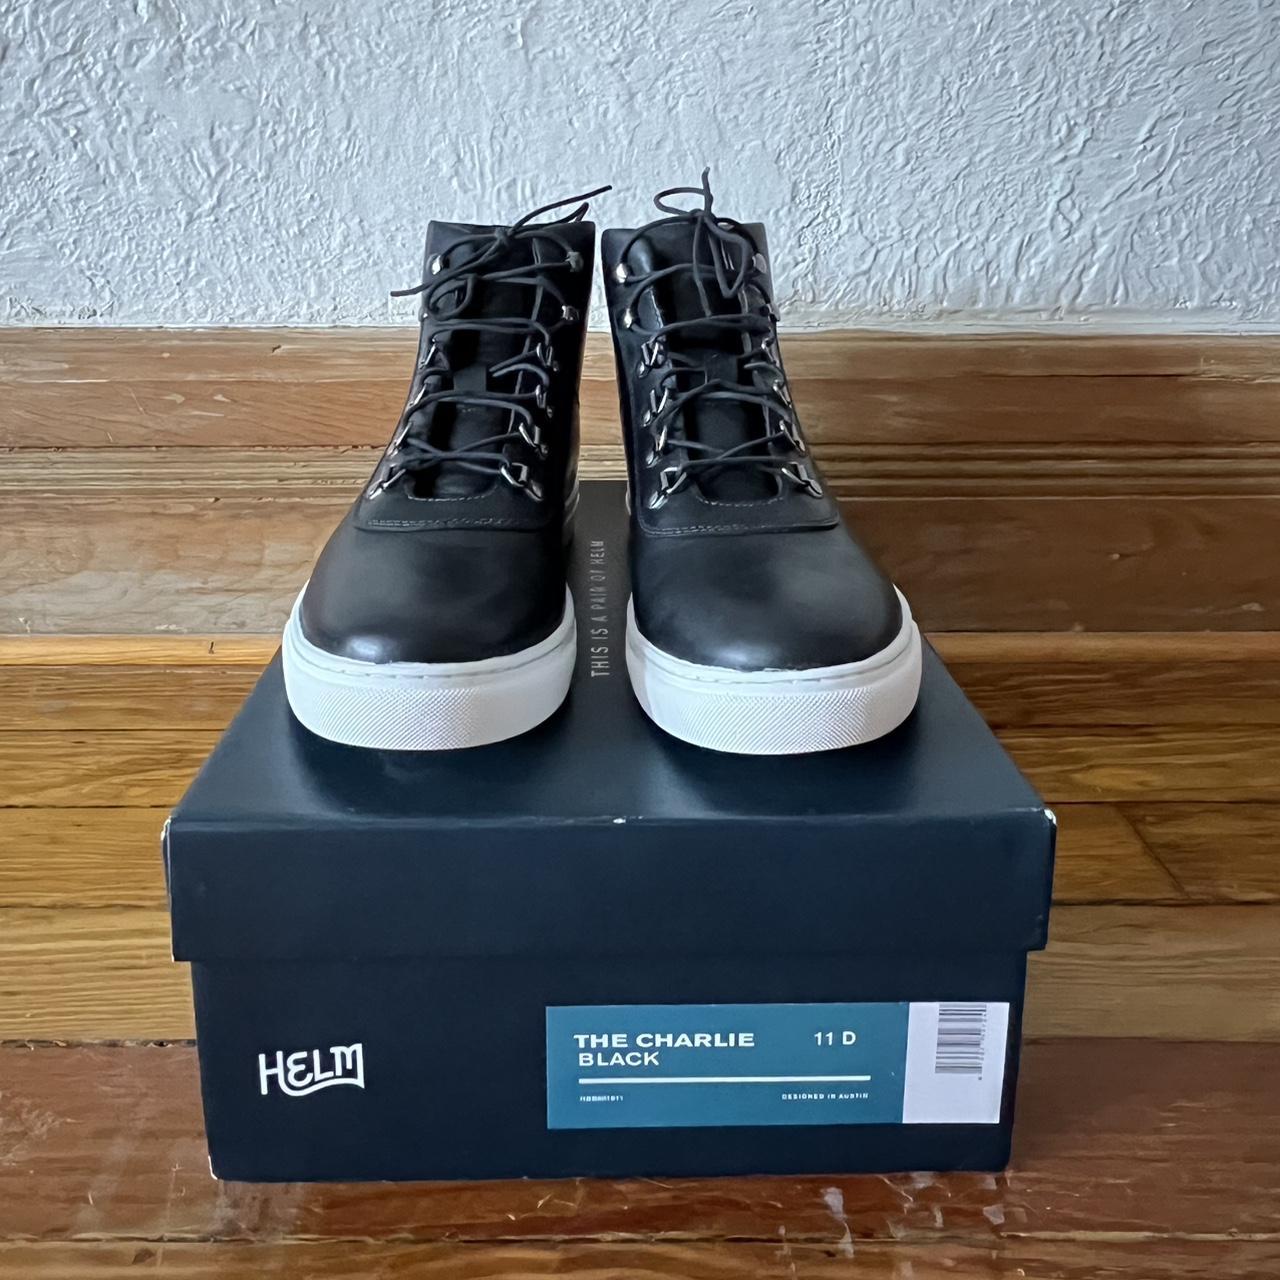 Helm Charlie Review (A Sneaker / Boot Hybrid That Actually Works)